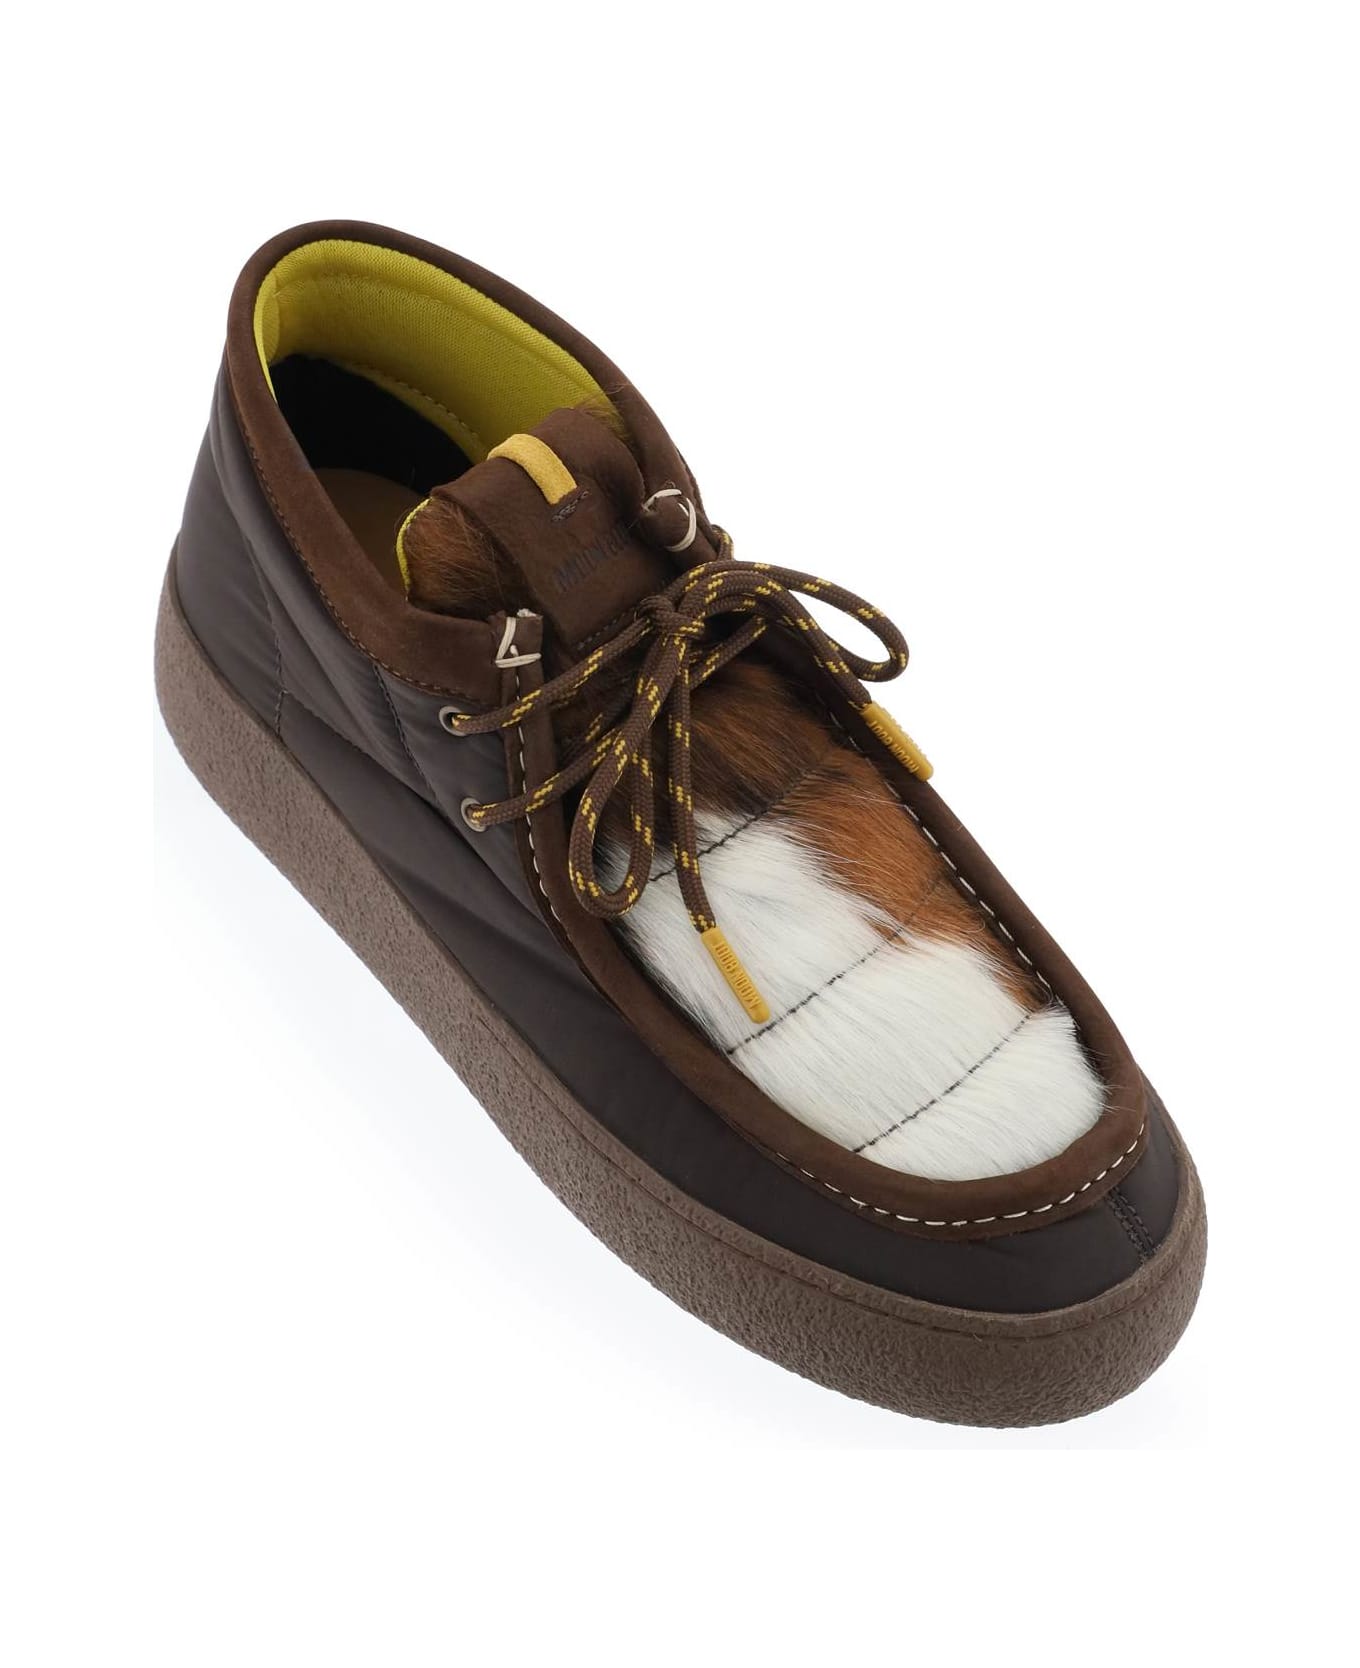 Moon Boot Mtrack Low Lace-ups - BROWN COW PRINT (White) ブーツ